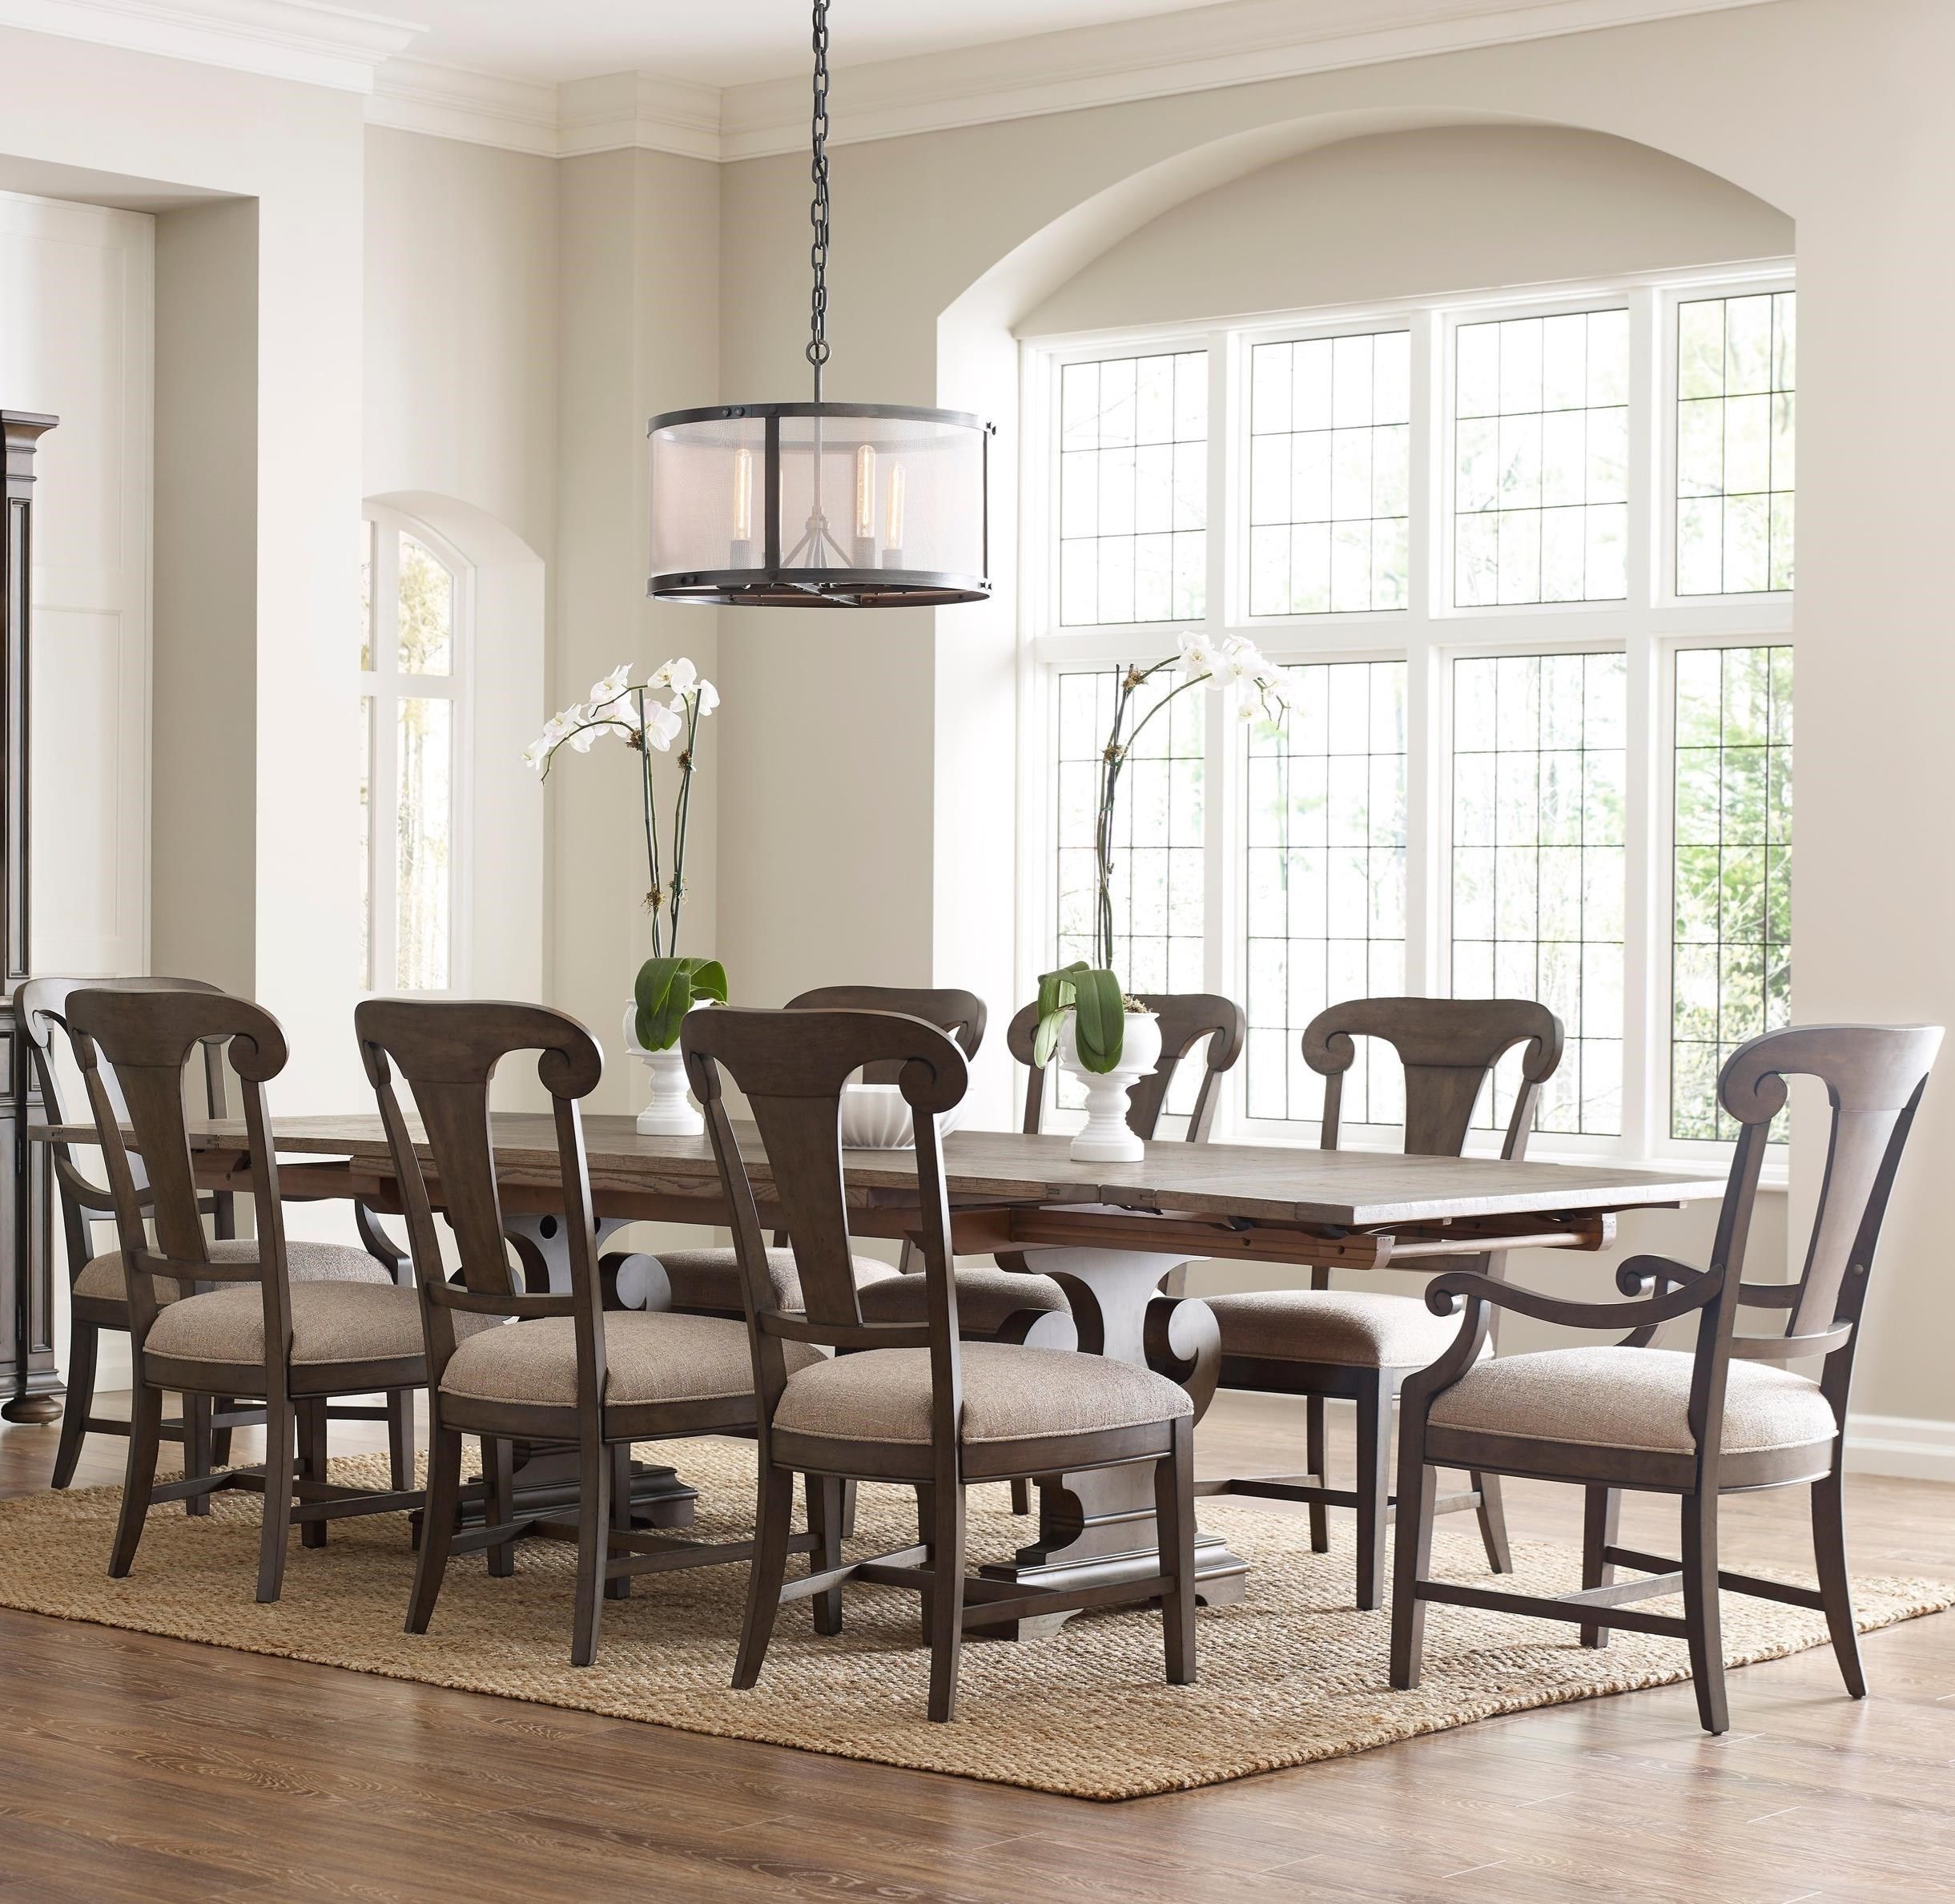 Kincaid Furniture Greyson Nine Piece Dining Set With Crawford Within Recent Crawford 7 Piece Rectangle Dining Sets (View 6 of 20)